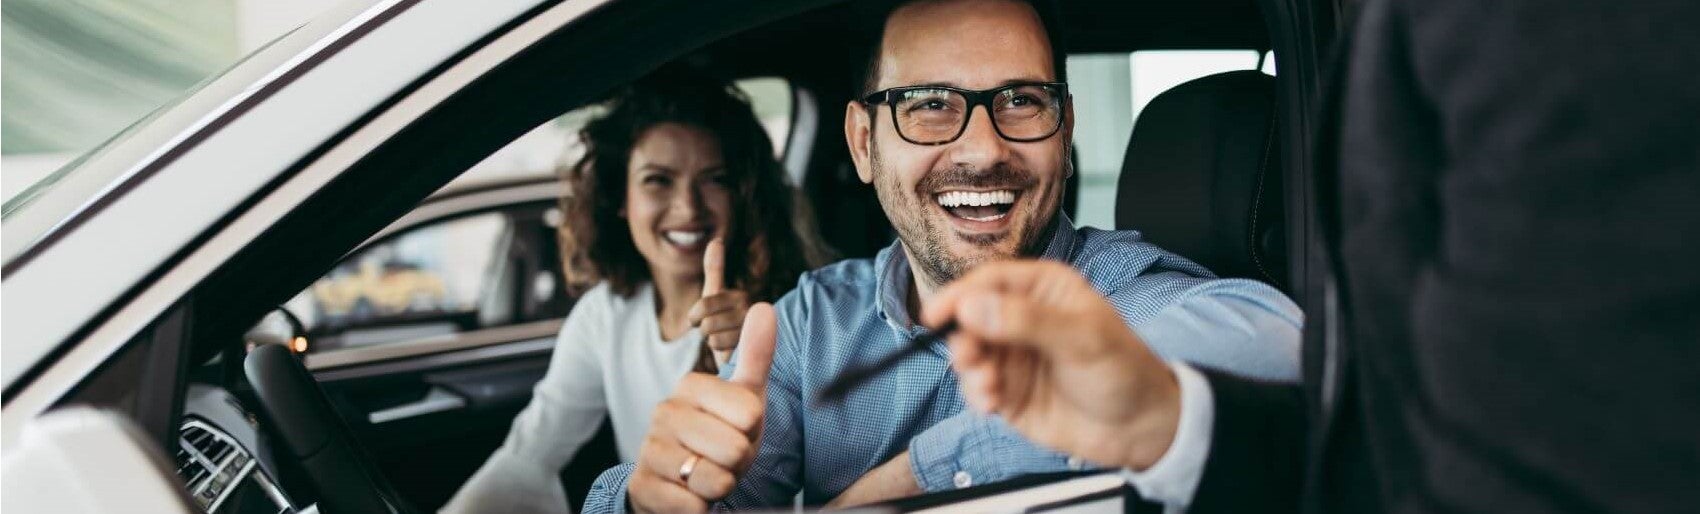 Couple Happy in Vehicle Snipped